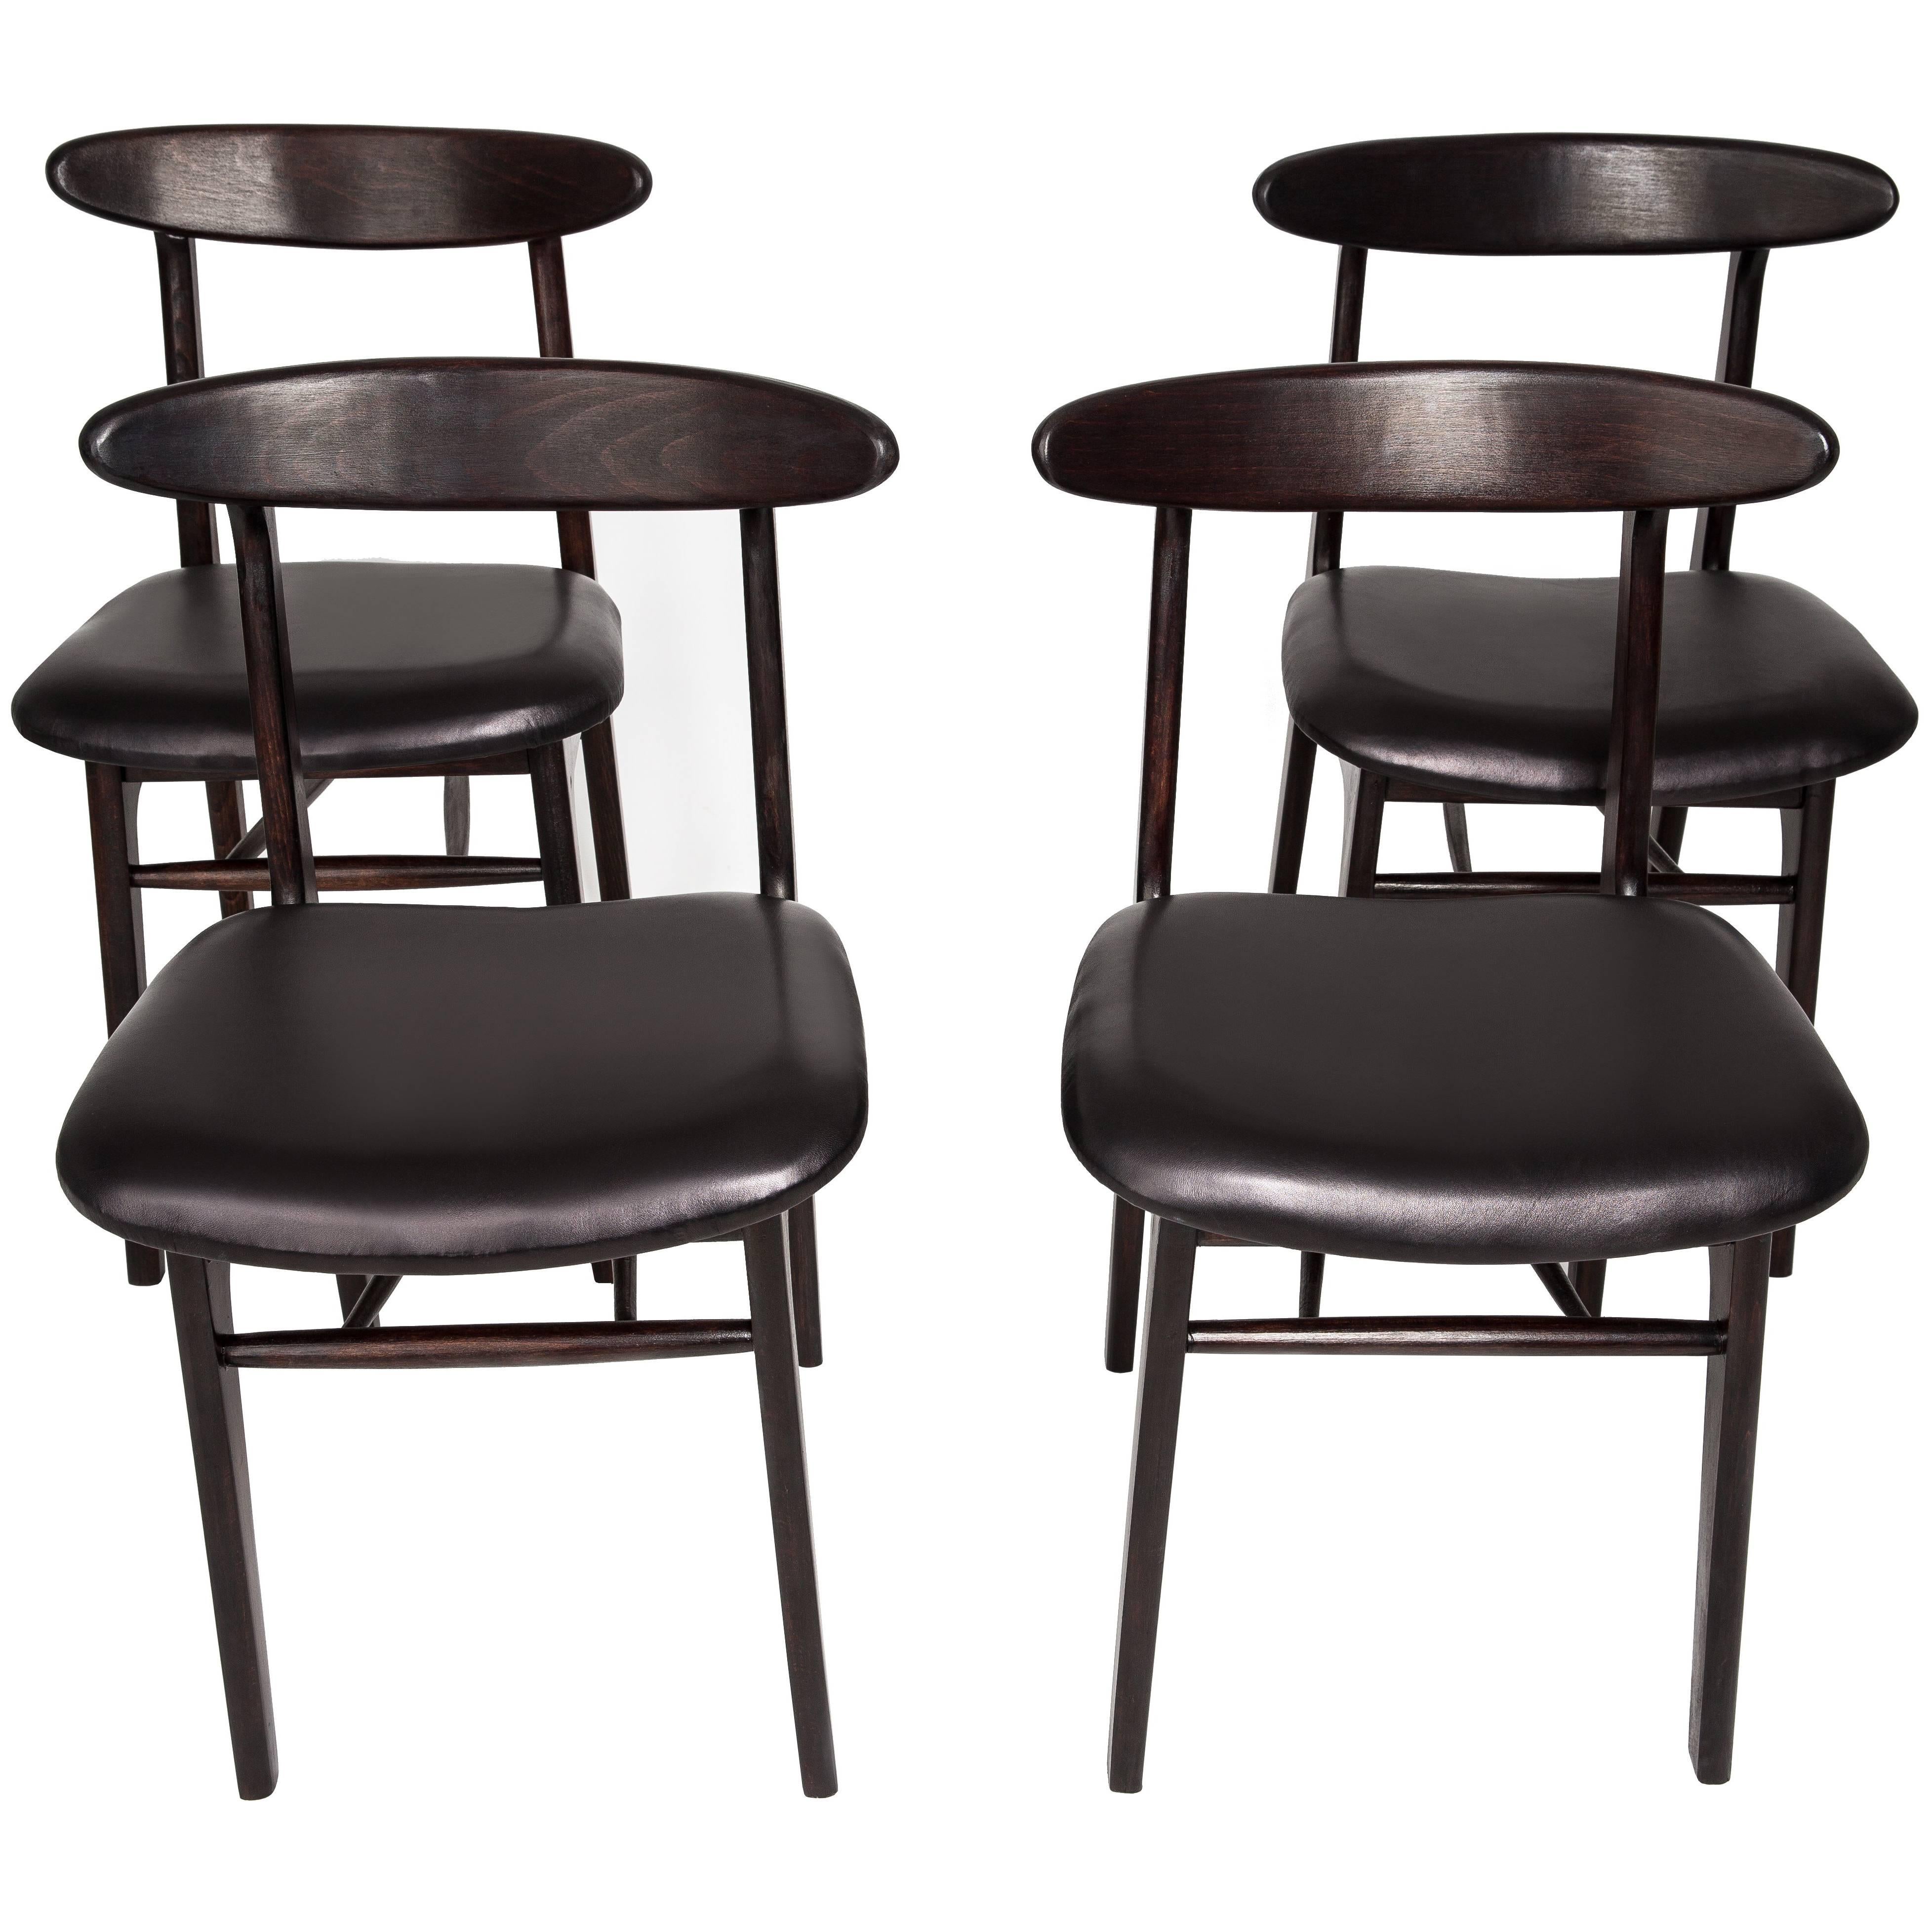 Set of Four Vintage Leather Dining Chairs, 1960s